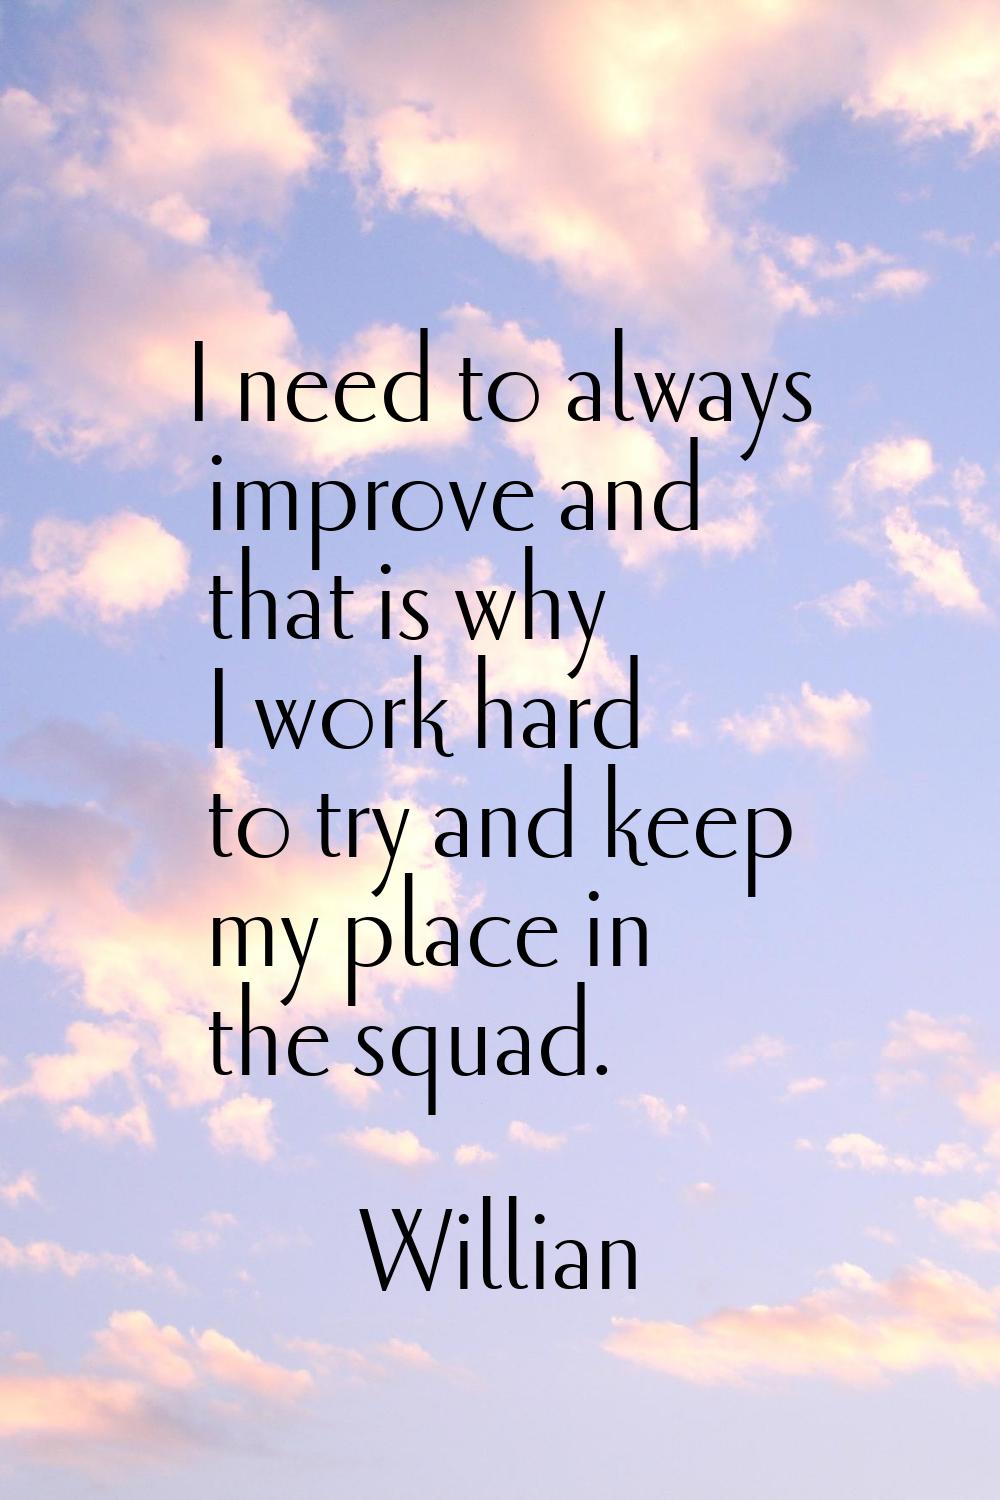 I need to always improve and that is why I work hard to try and keep my place in the squad.